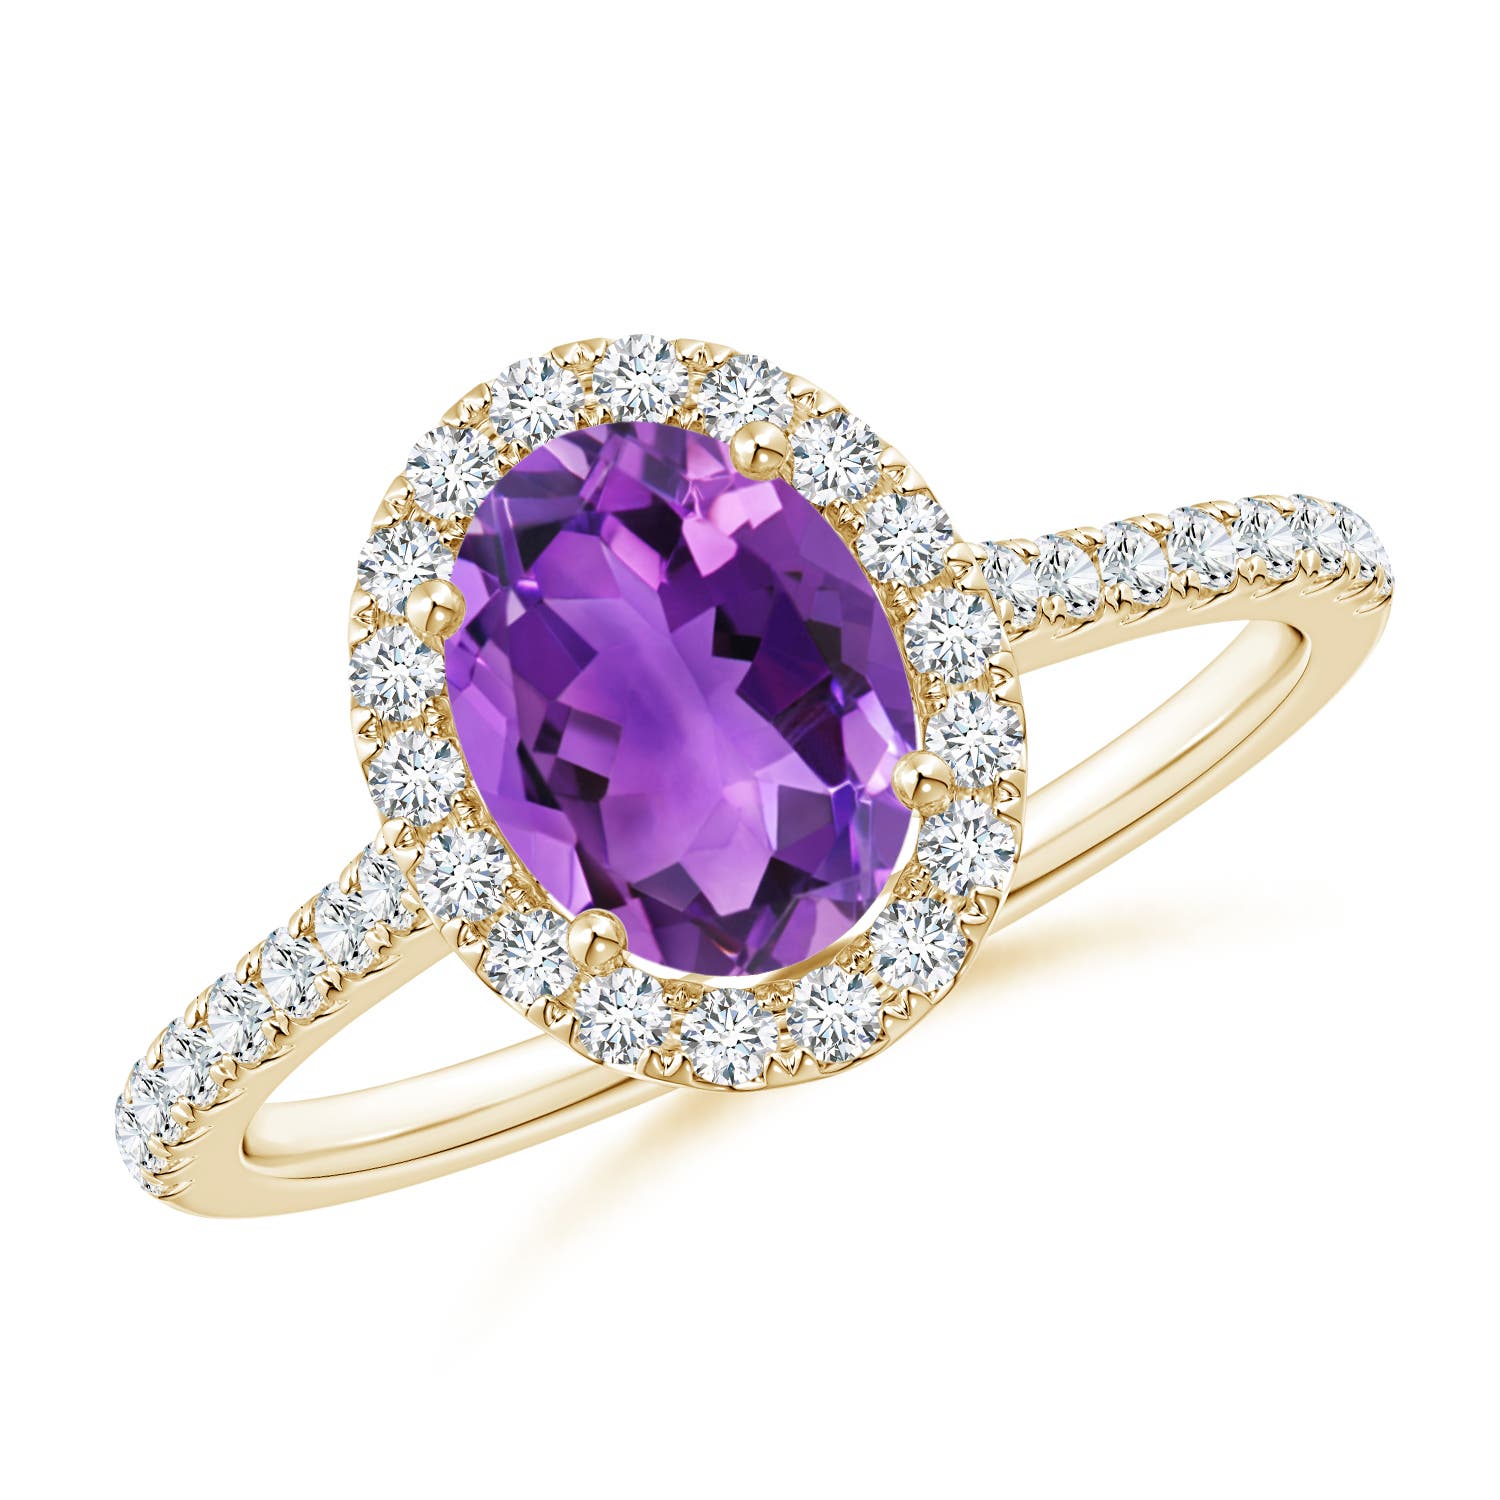 Oval Amethyst Halo Ring with Diamond Accents | Angara